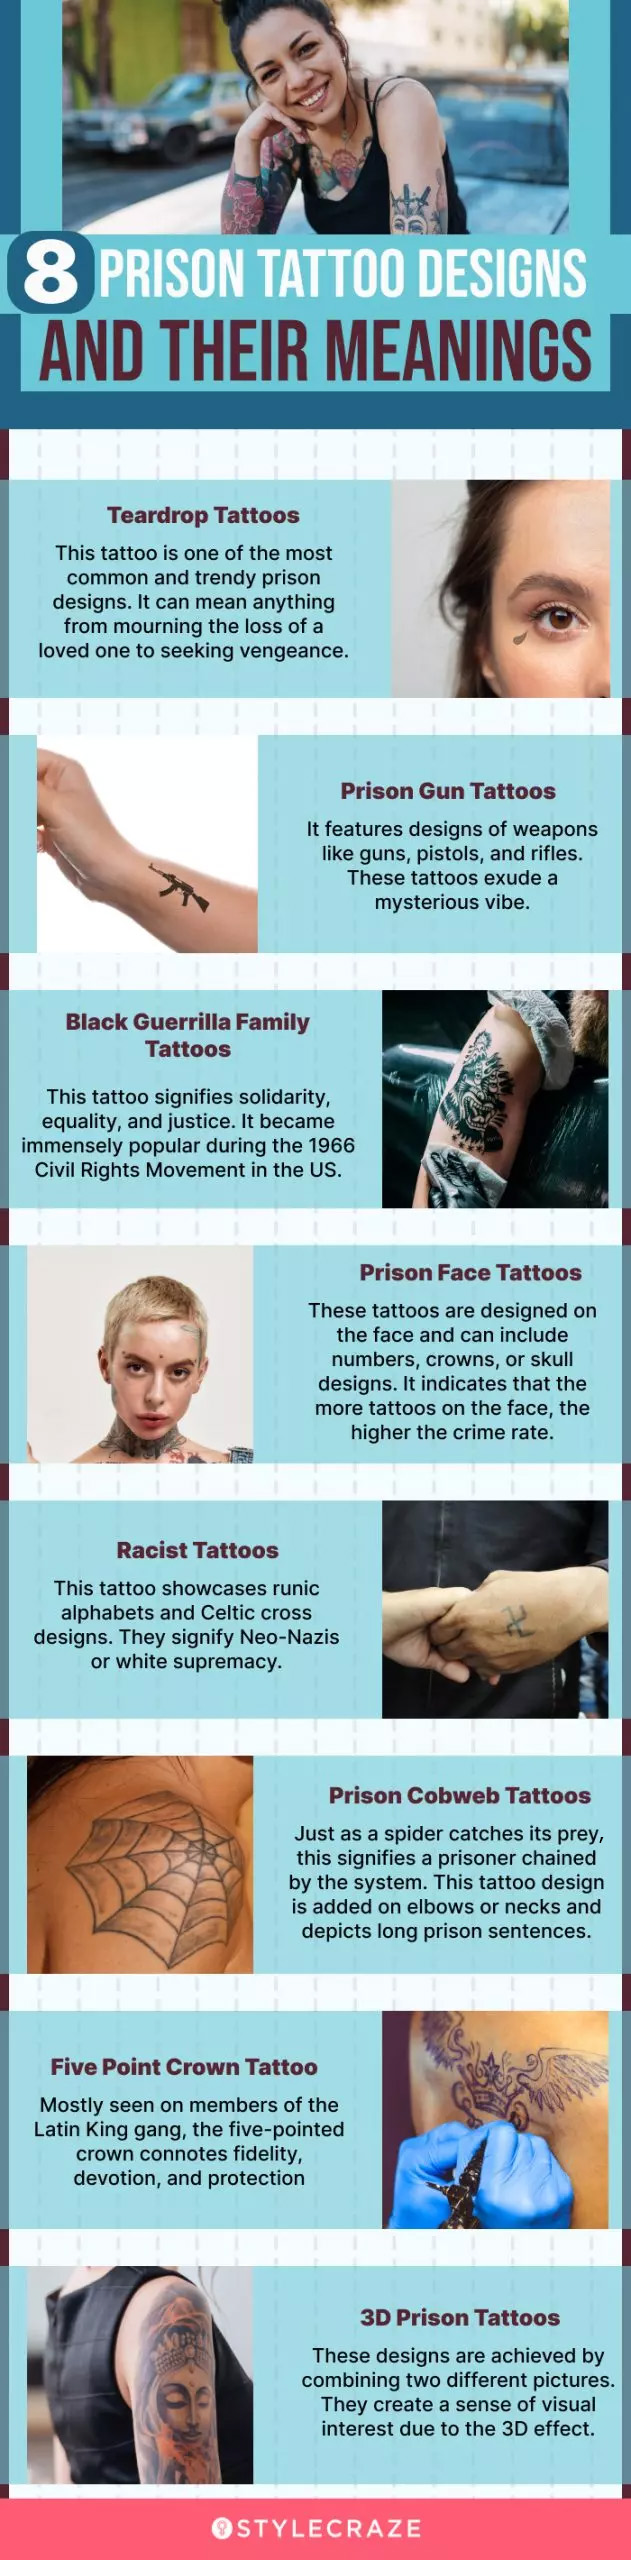 15 prison tattoos and their meanings